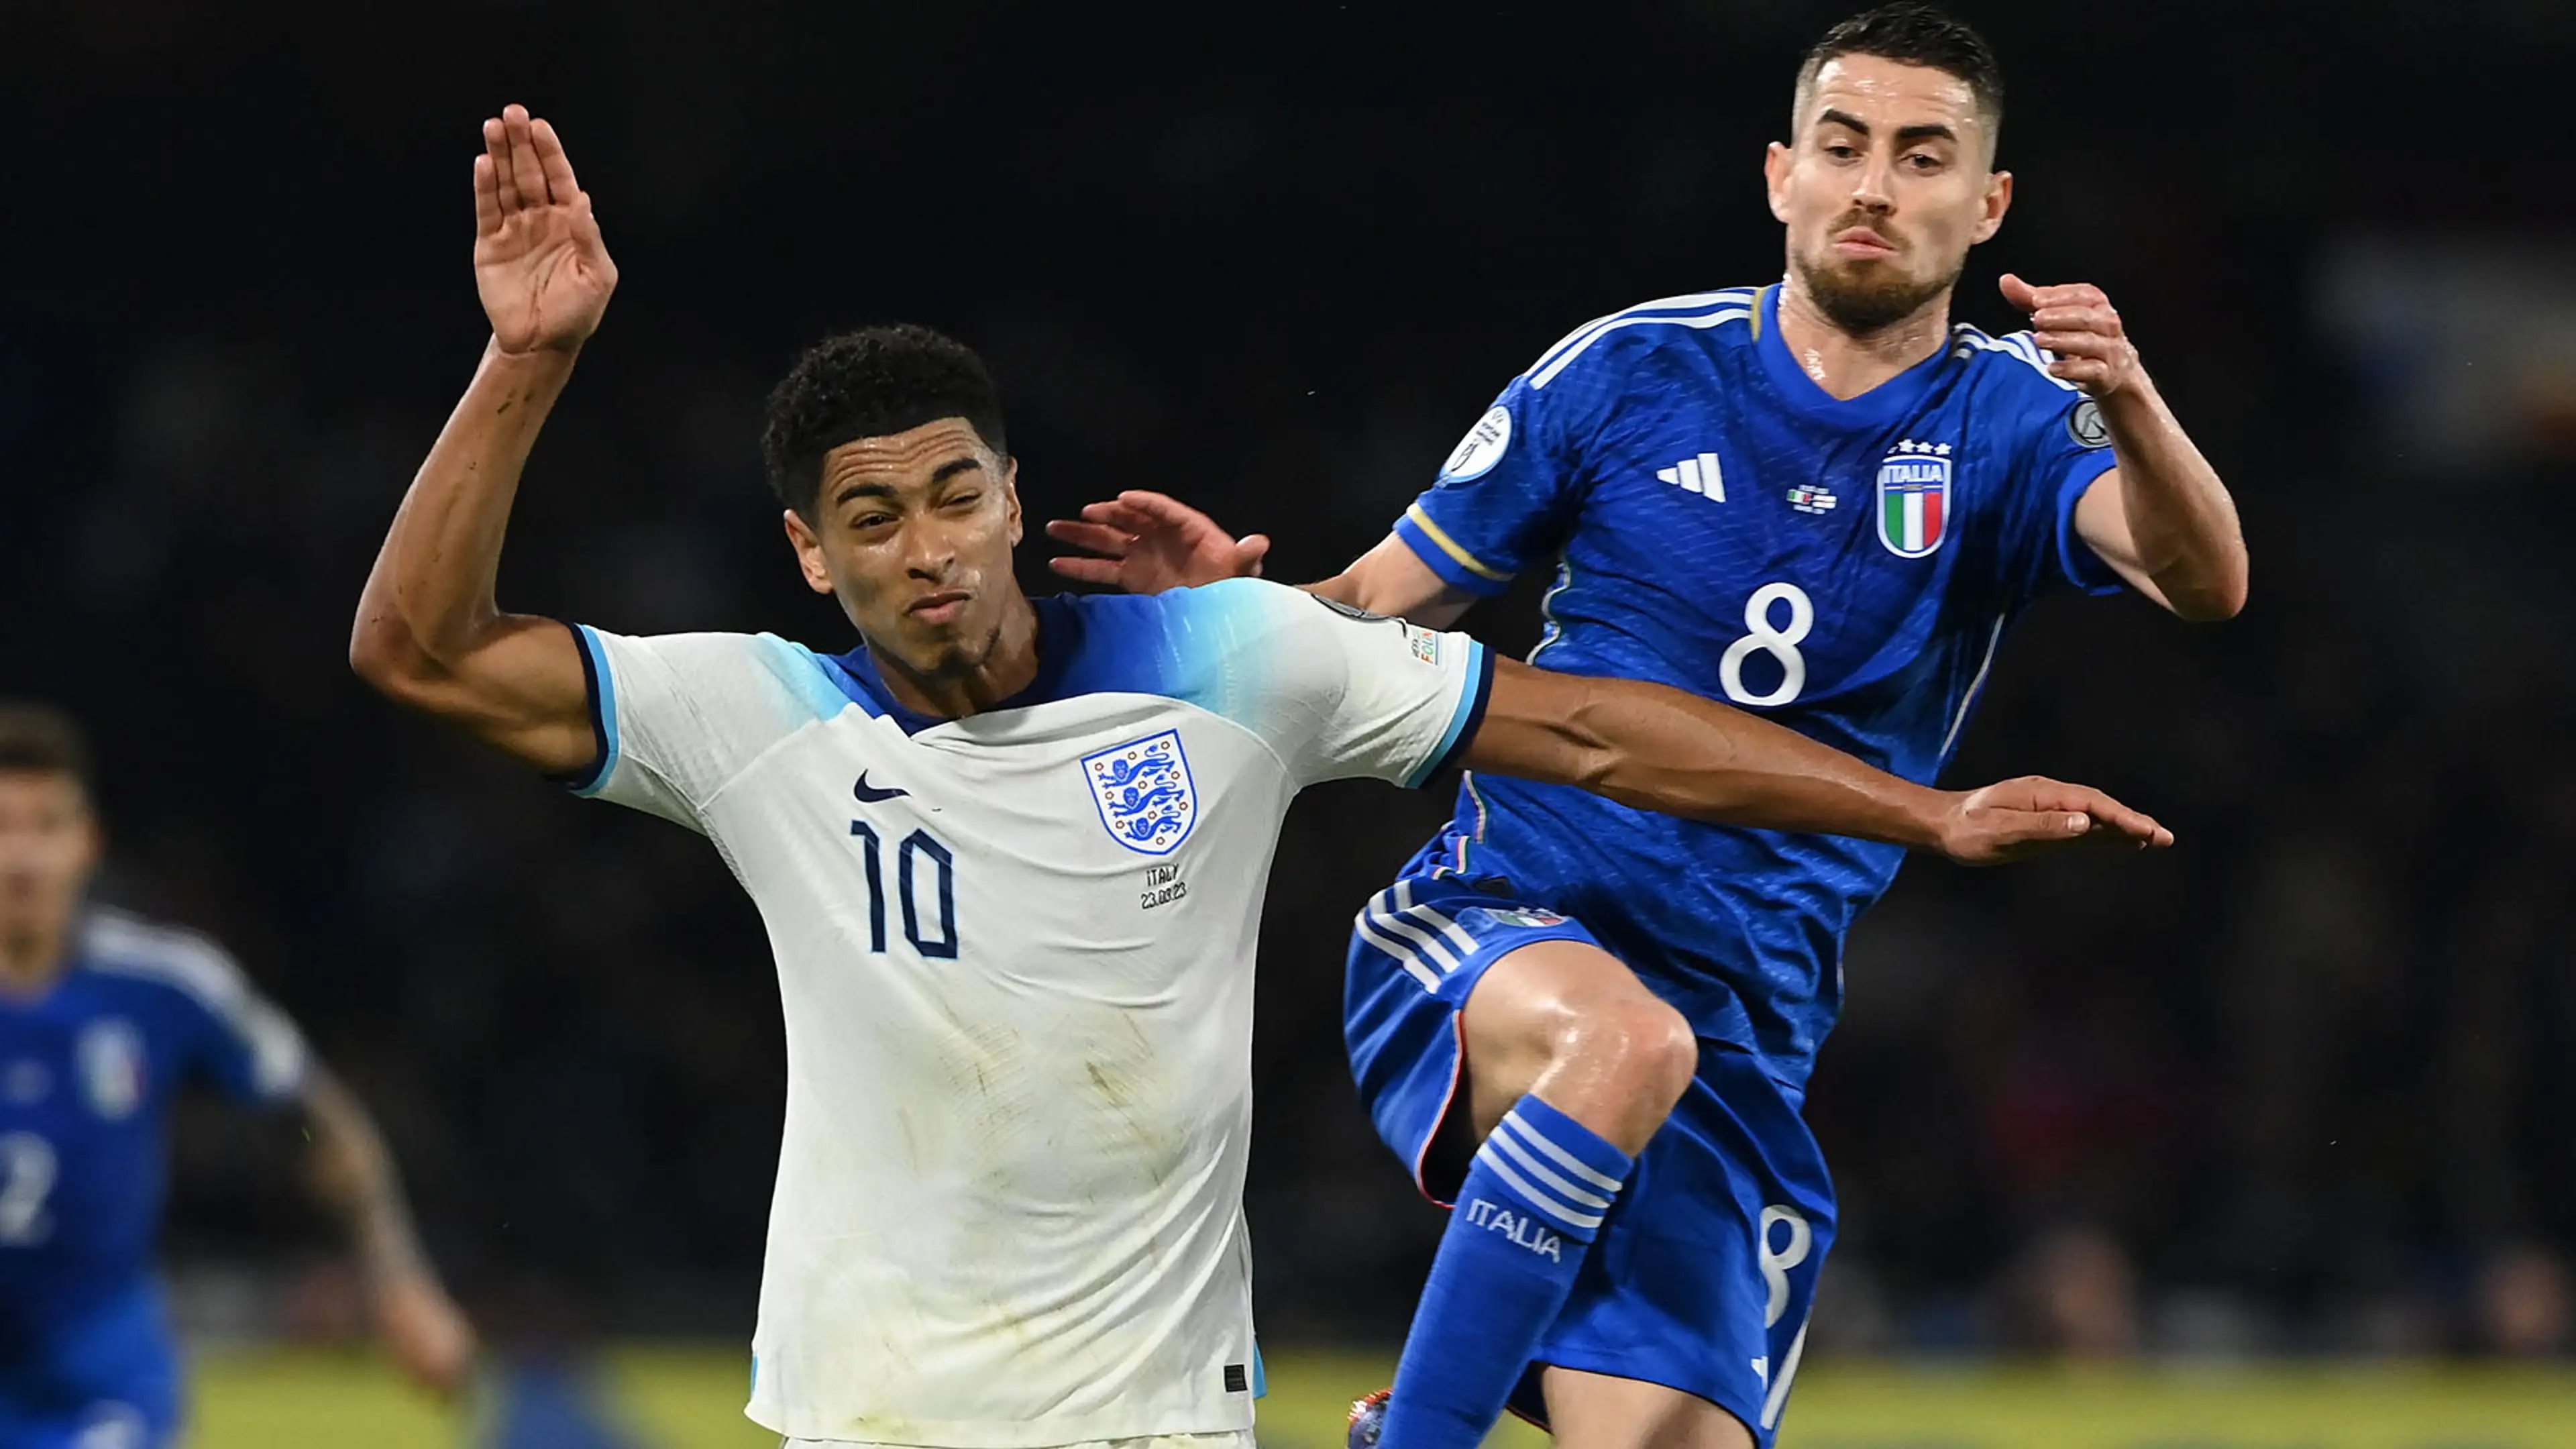 UEFA Euro qualifiers: Where to watch England vs Italy